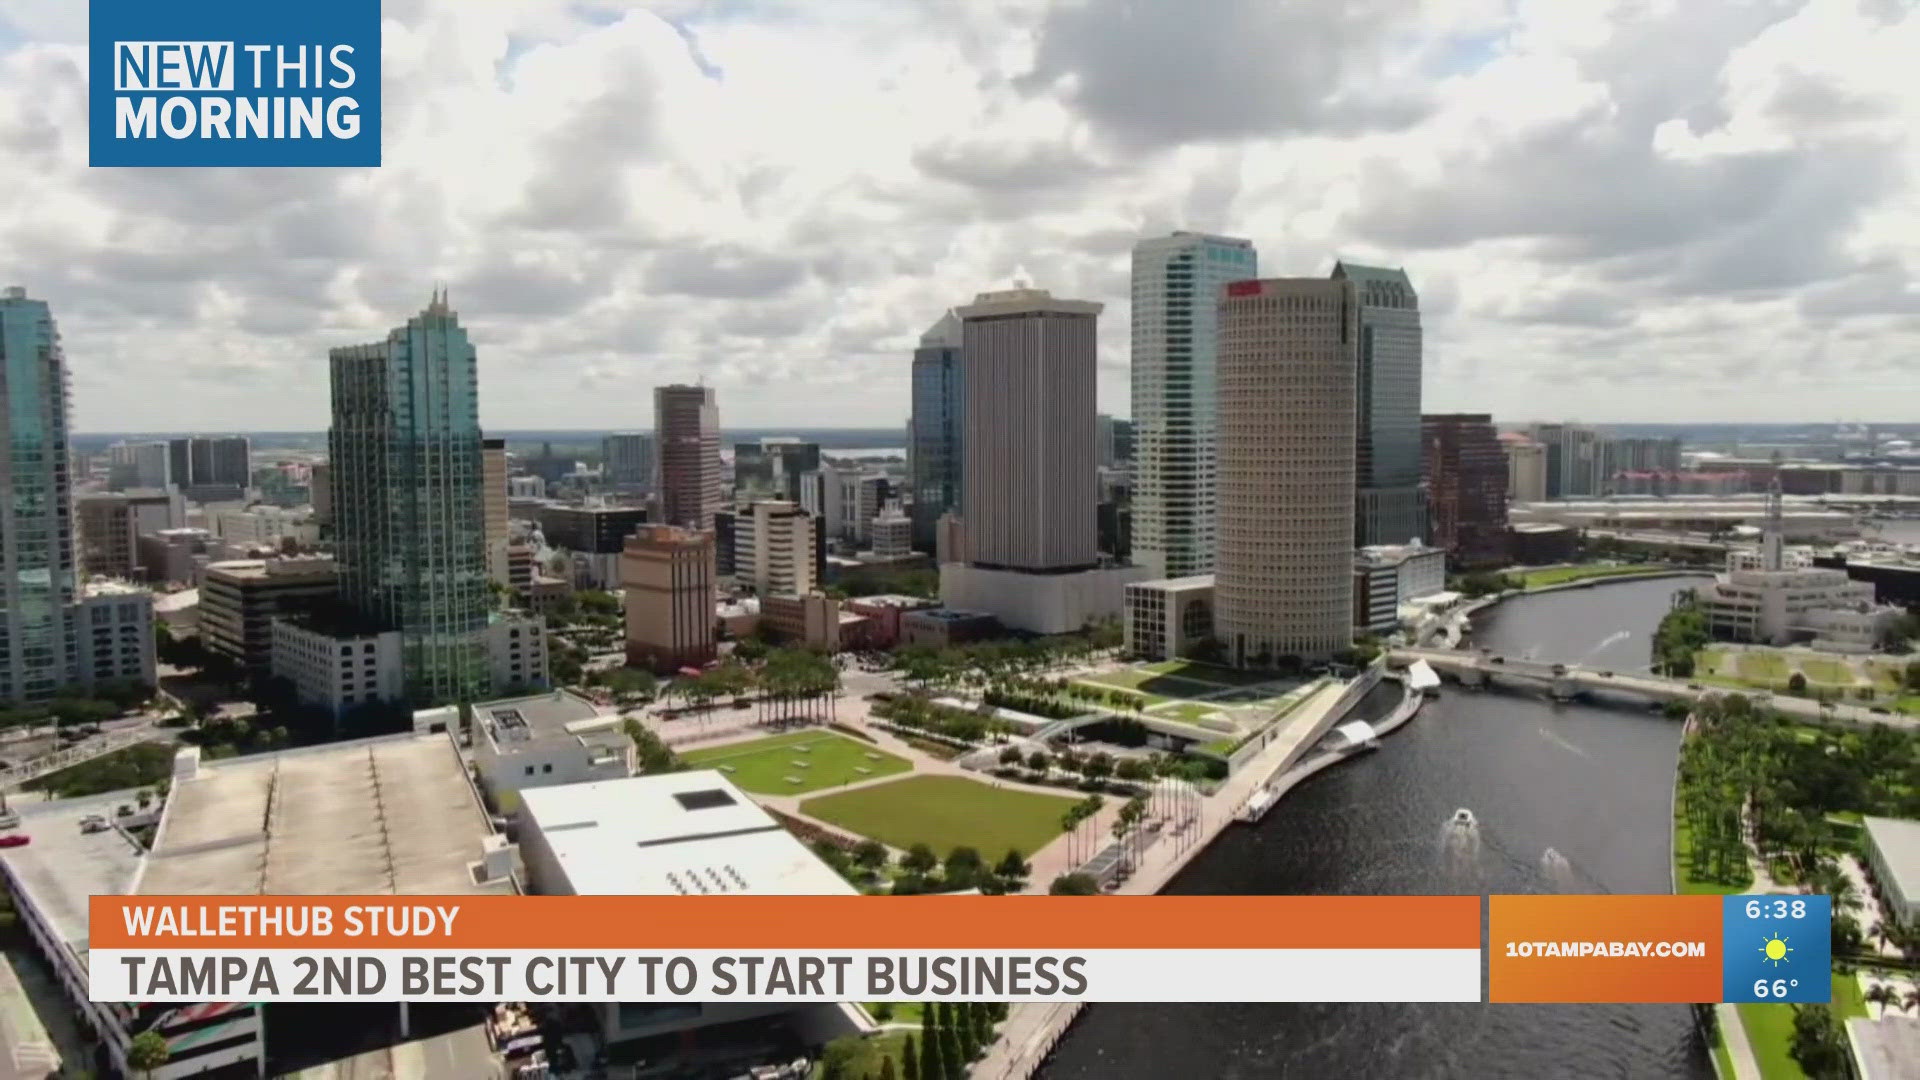 A new study found Tampa ranks among the top big cities to start a business in.